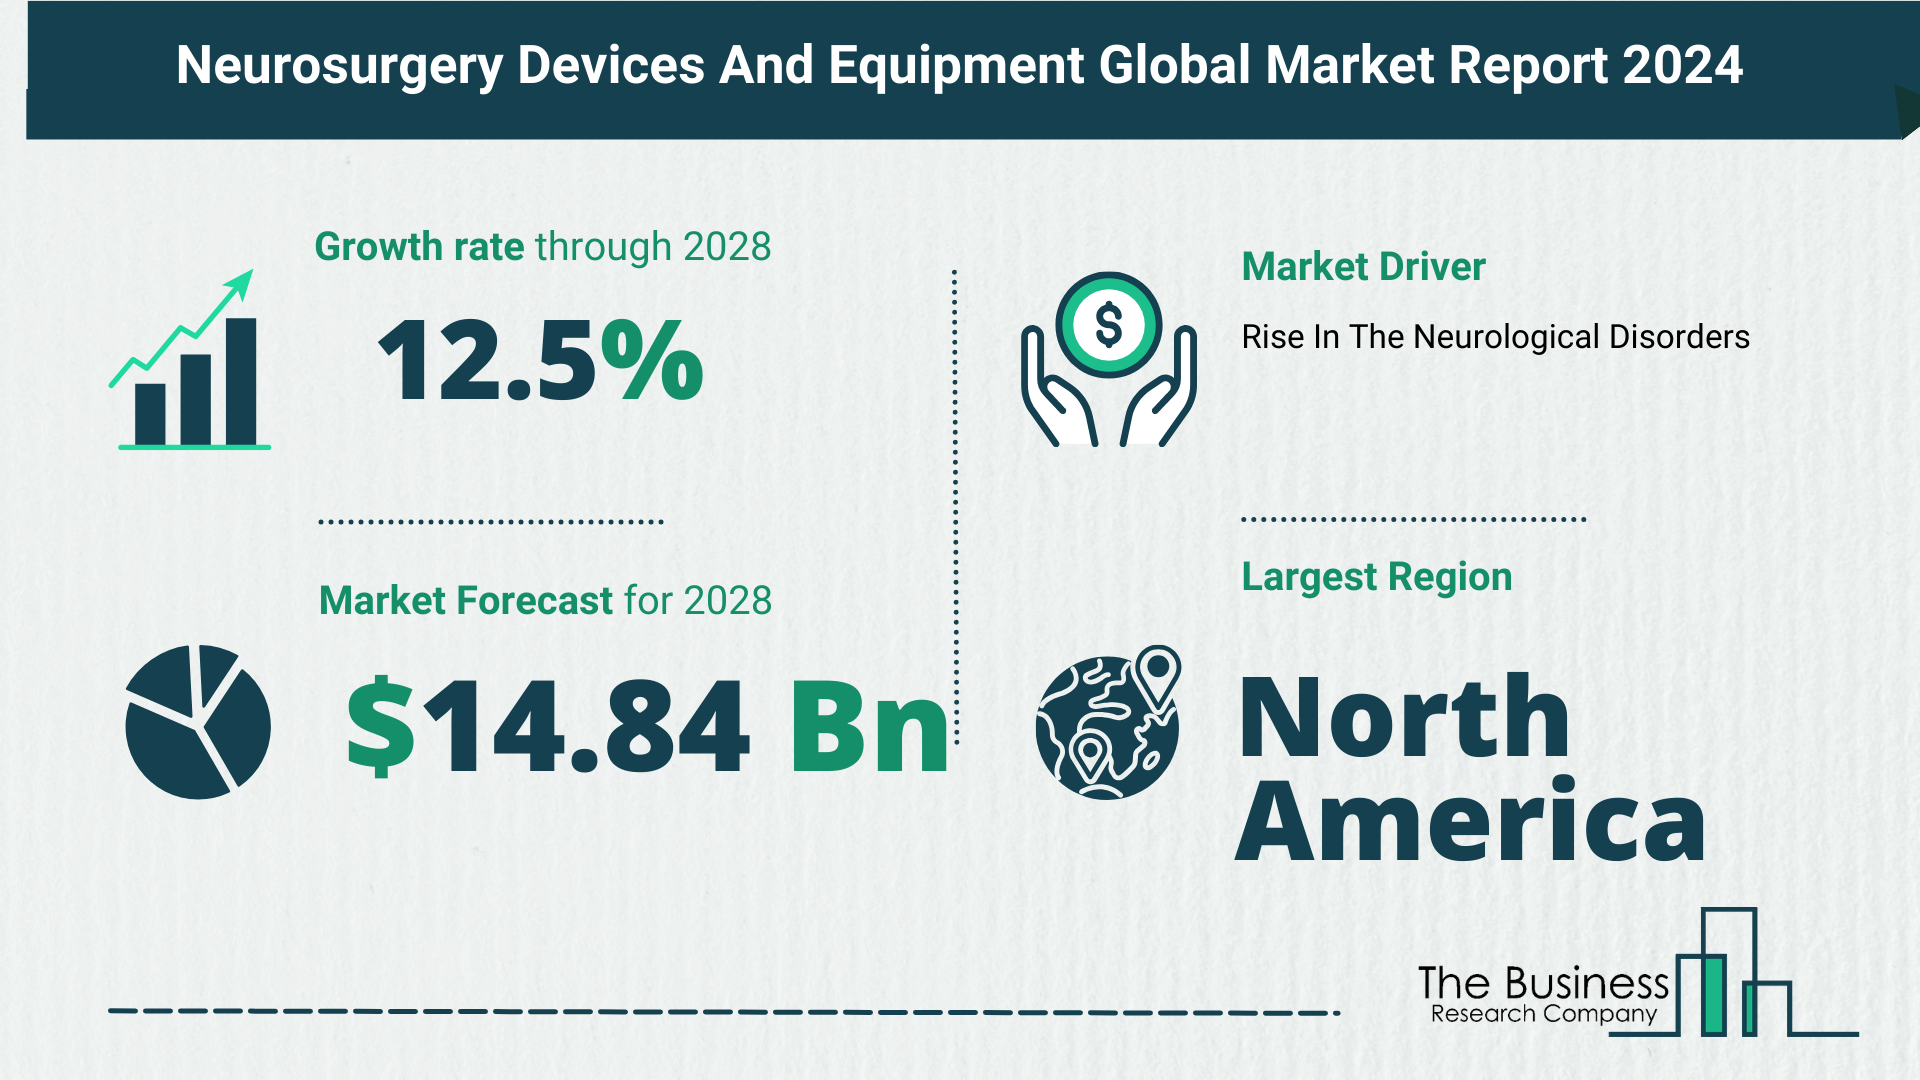 Comprehensive Analysis On Size, Share, And Drivers Of The Neurosurgery Devices And Equipment Market